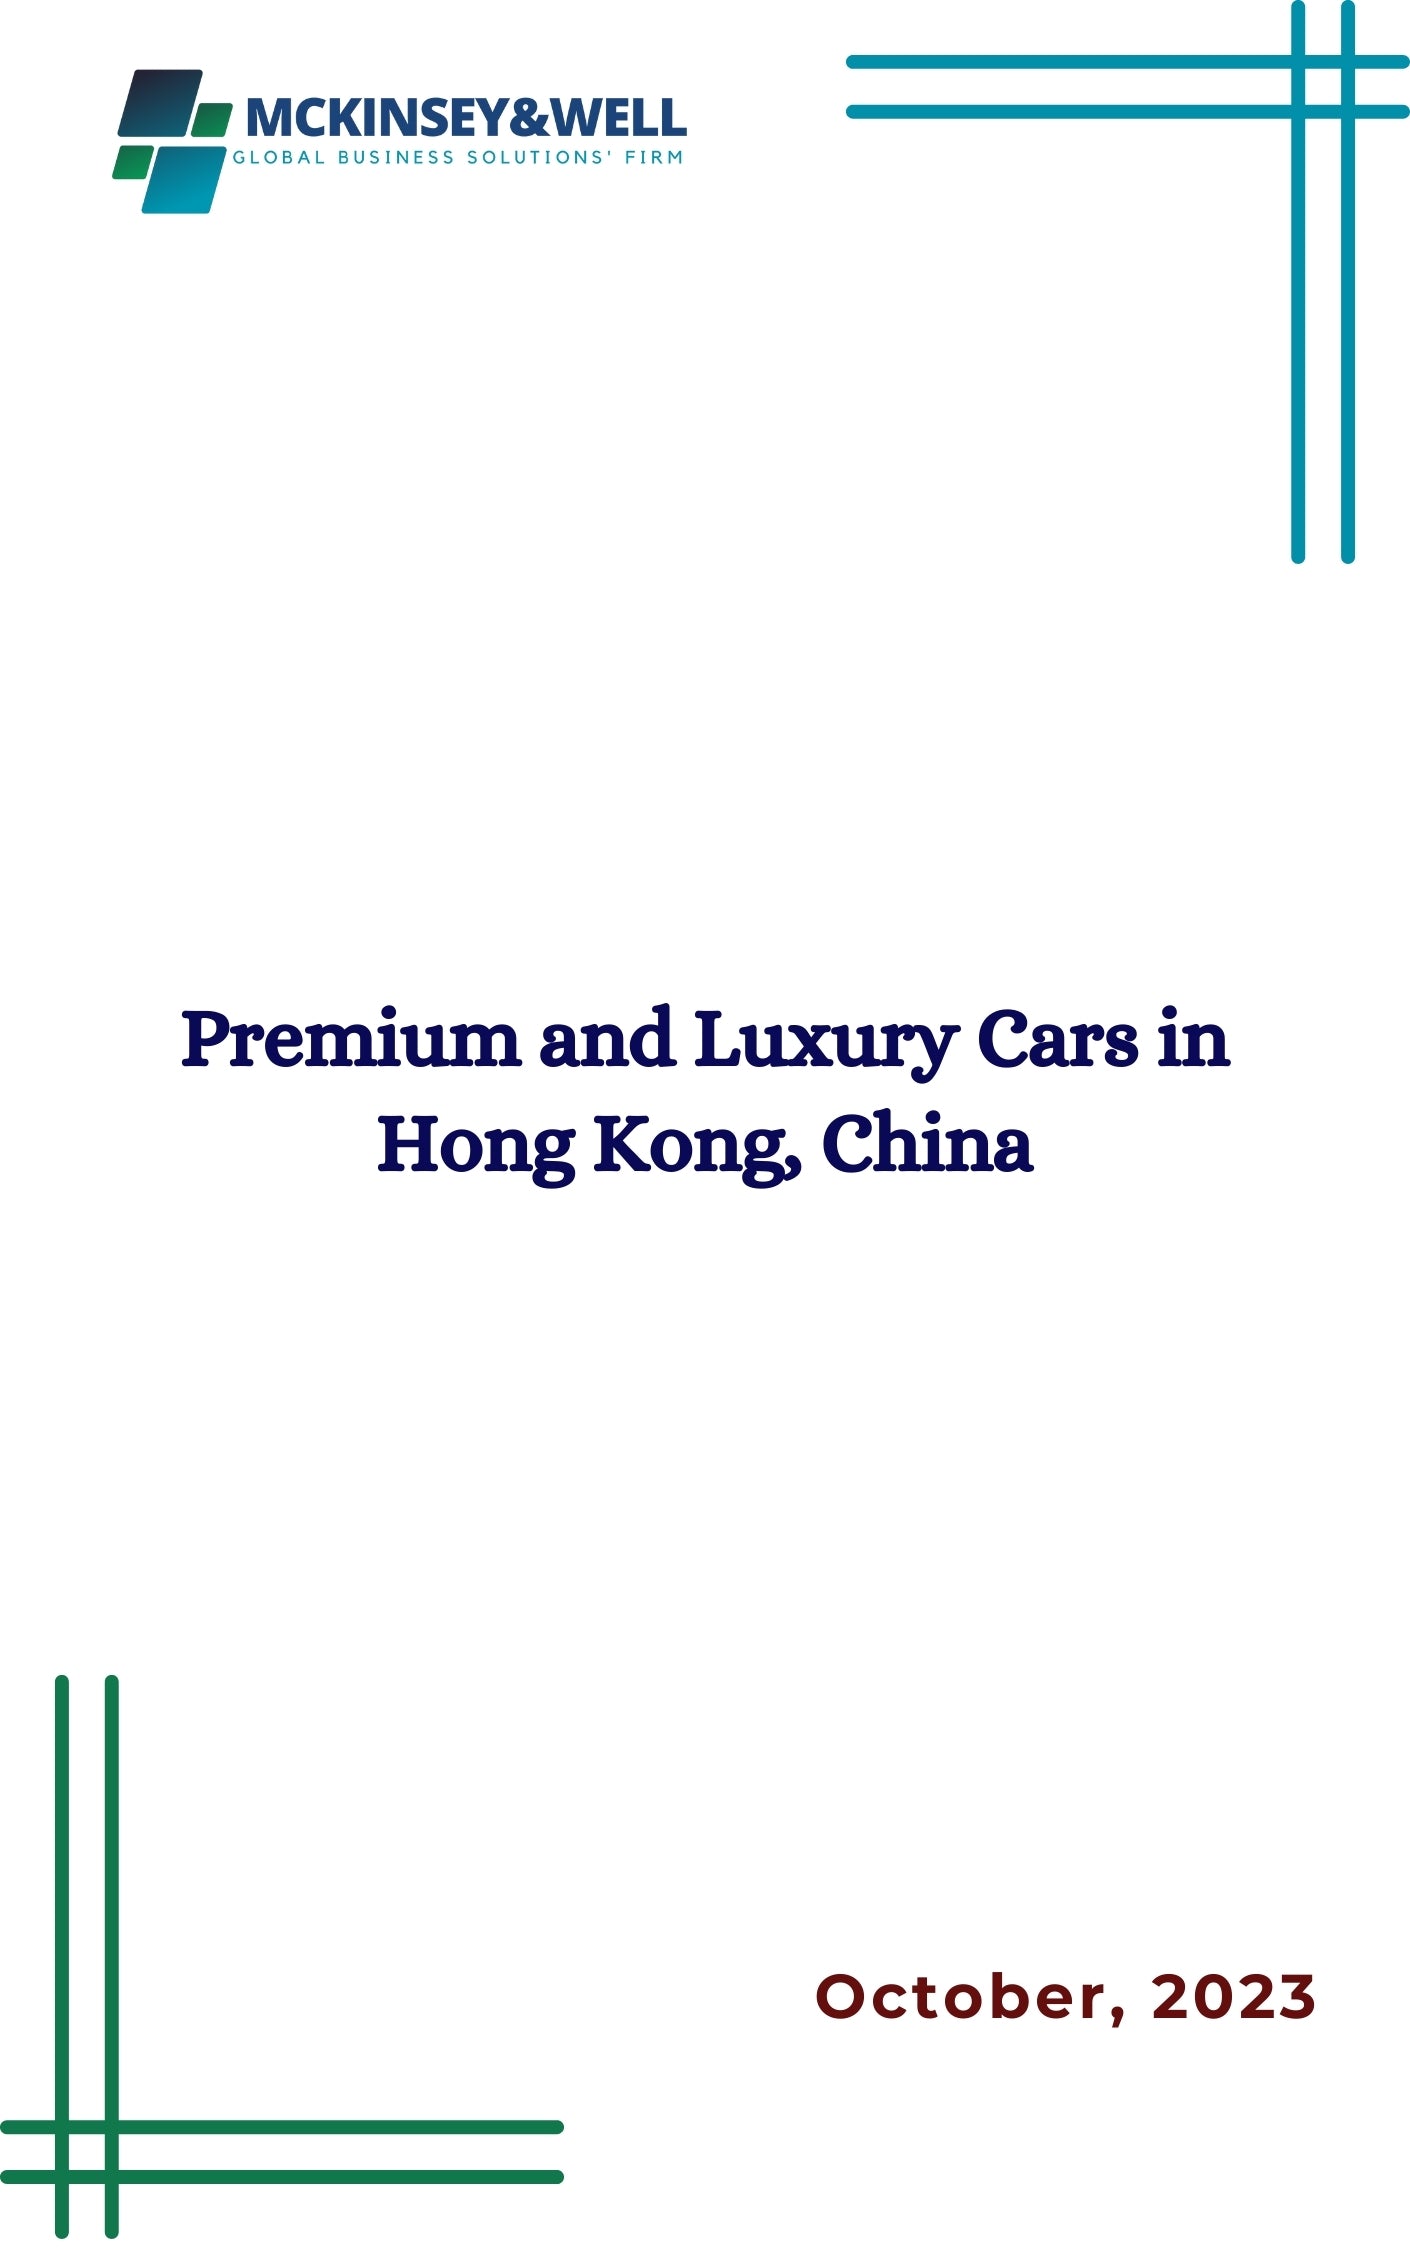 Premium and Luxury Cars in Hong Kong, China